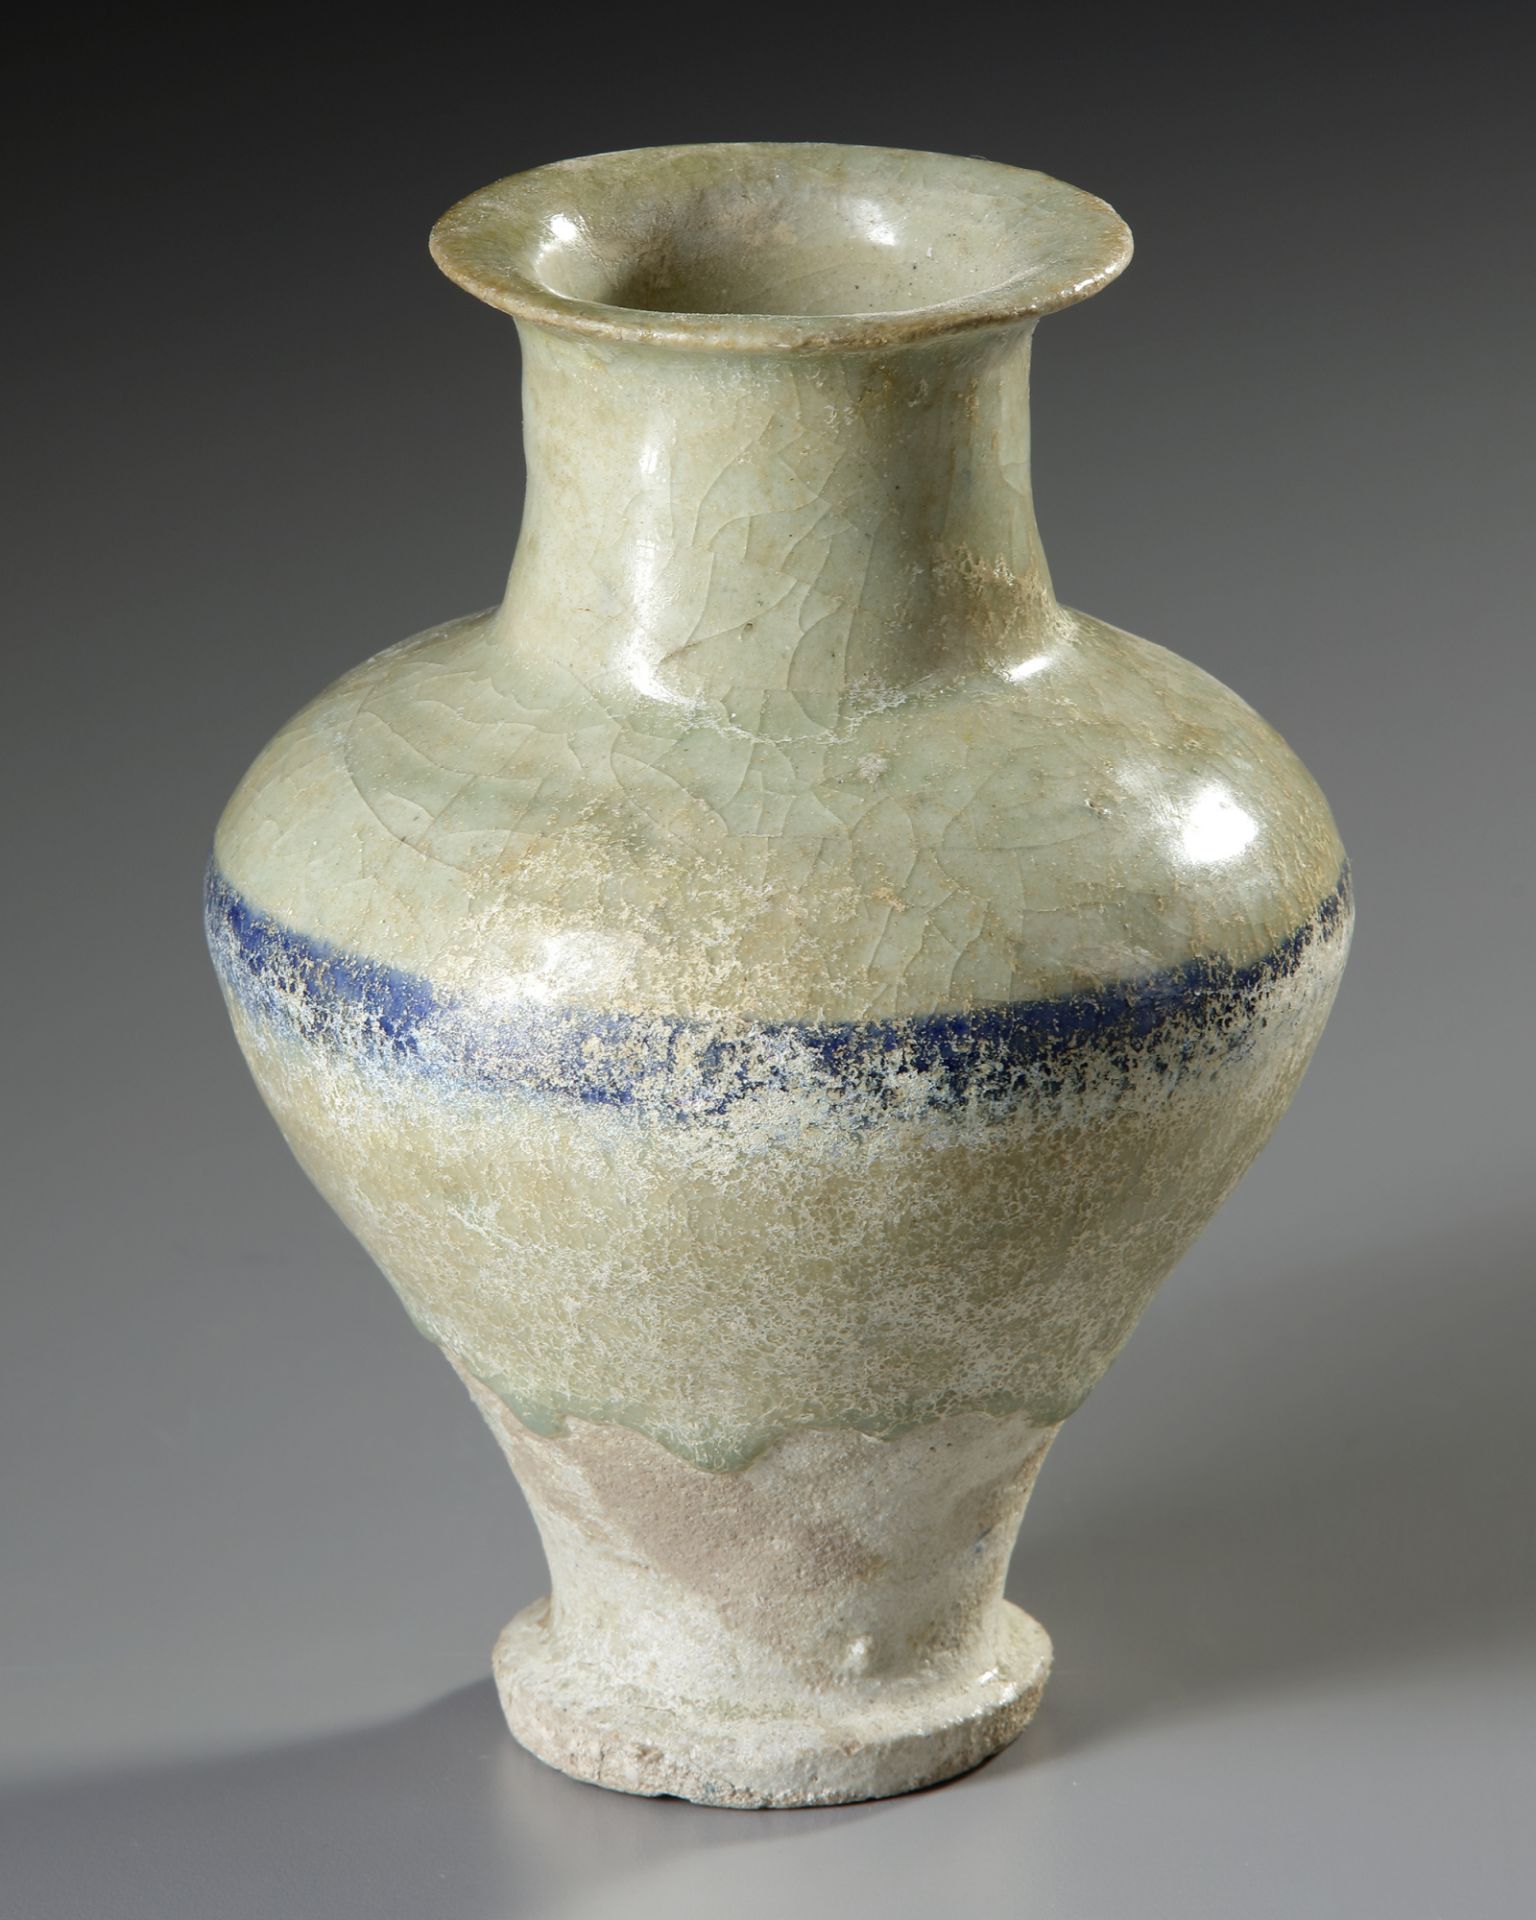 A RAQQA BLUE AND WHITE POTTERY JAR, SYRIA, 13TH CENTURY - Image 5 of 7